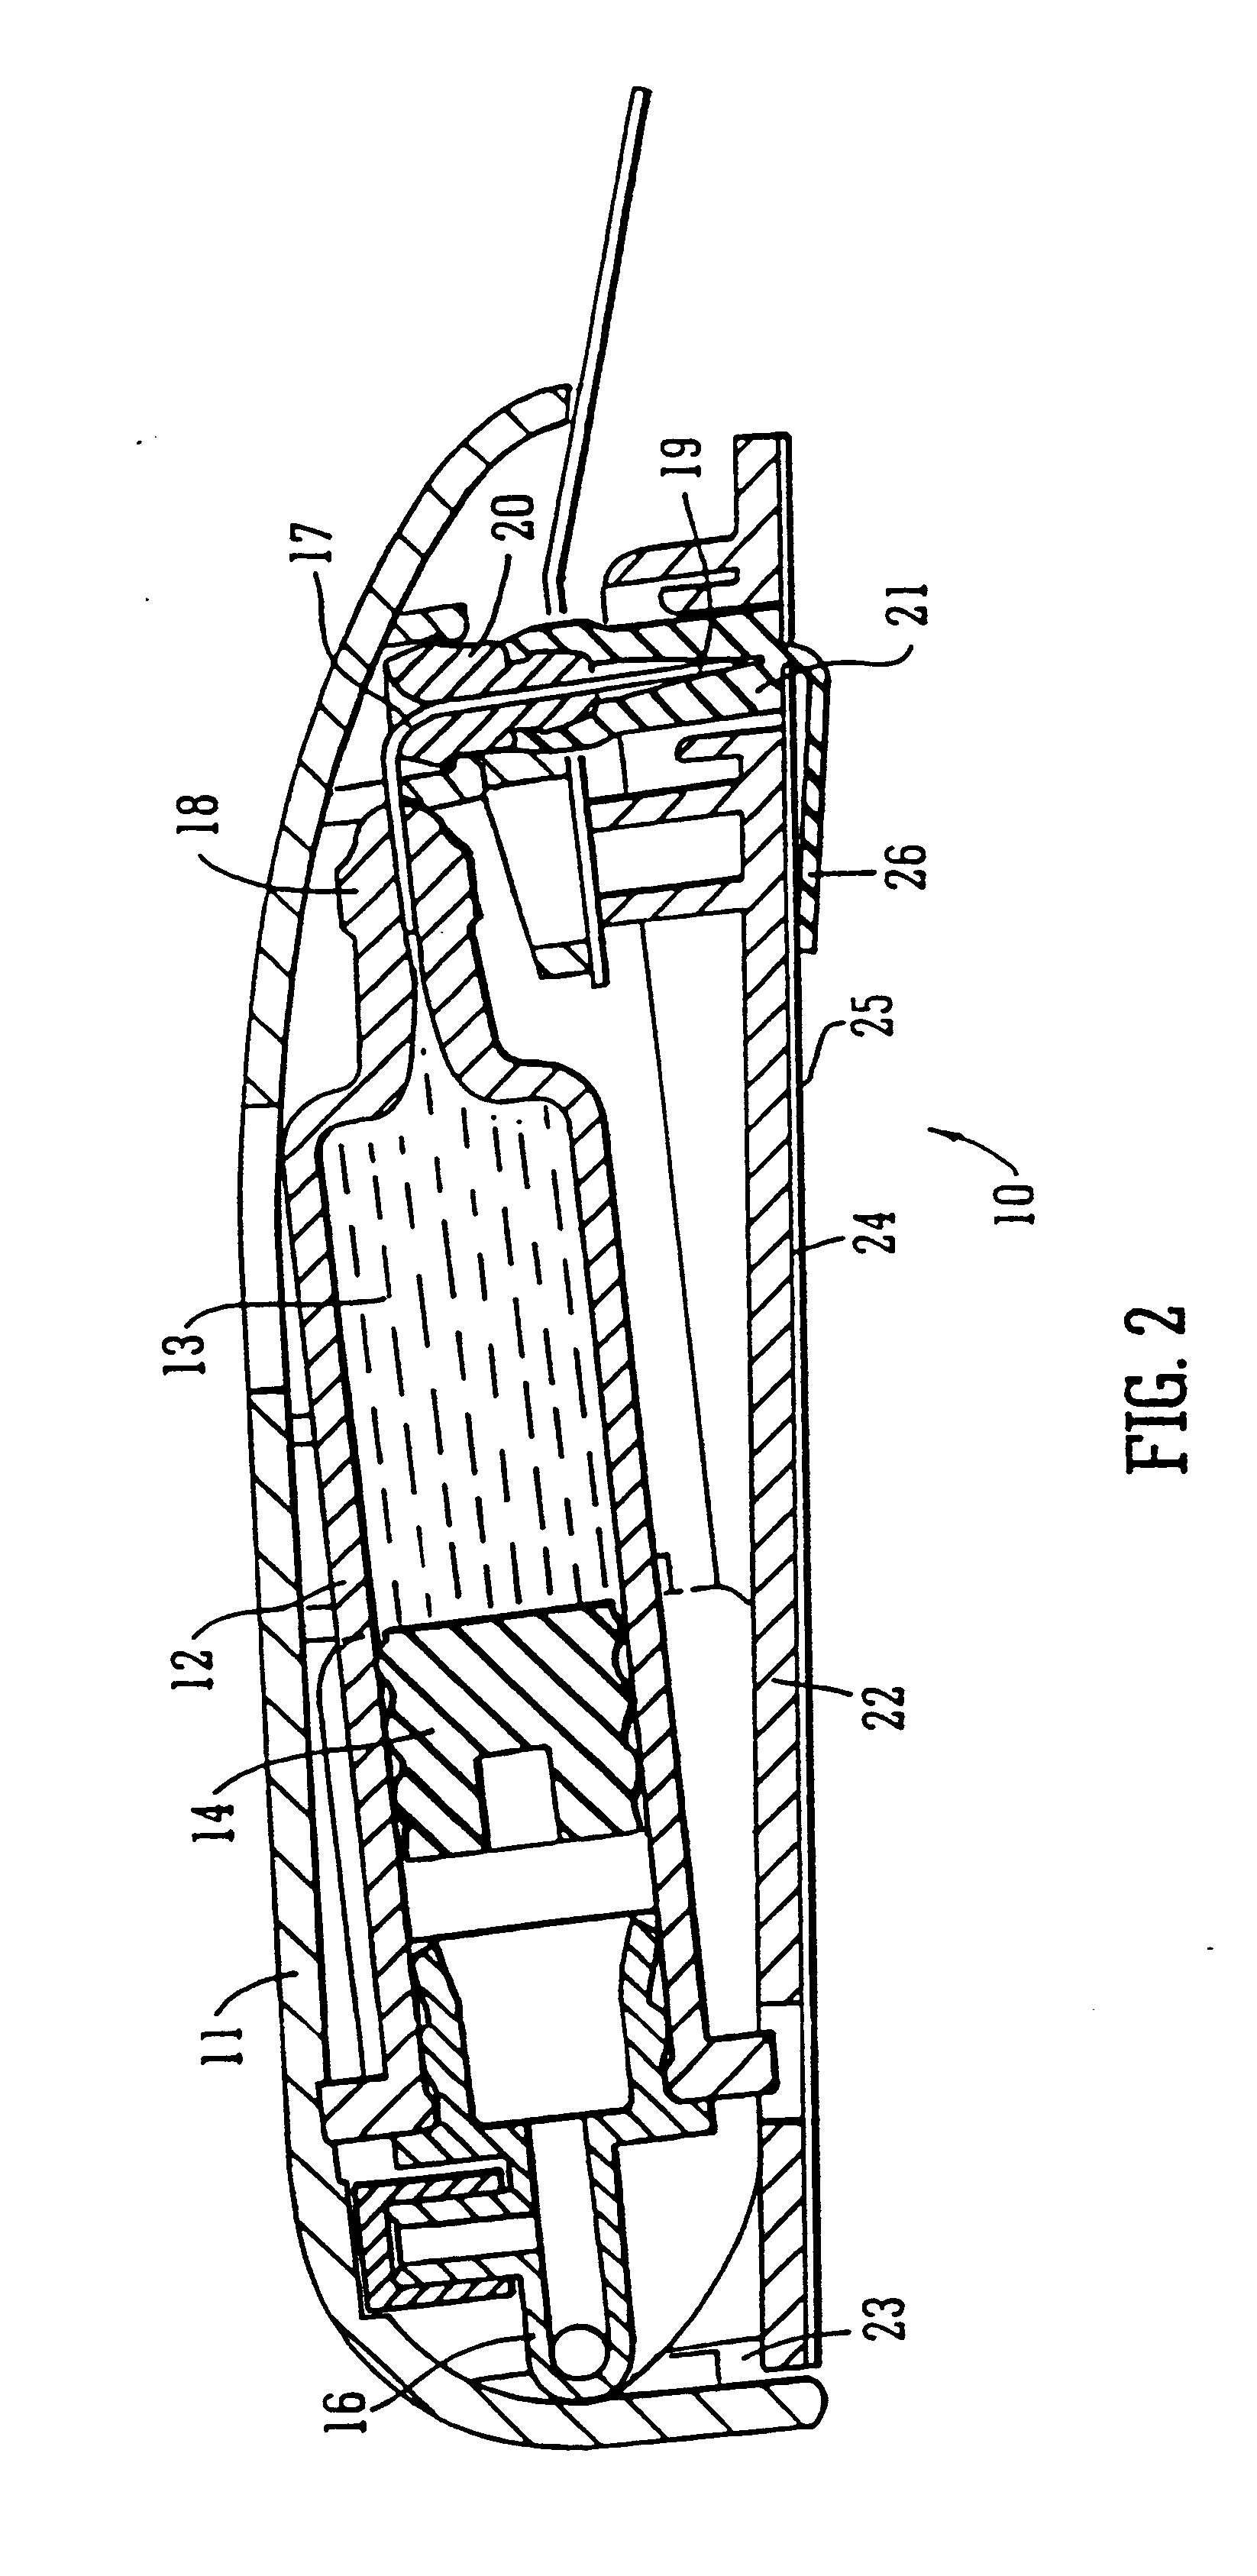 Pre-filled drug-delivery device and method of manufacture and assembly of same